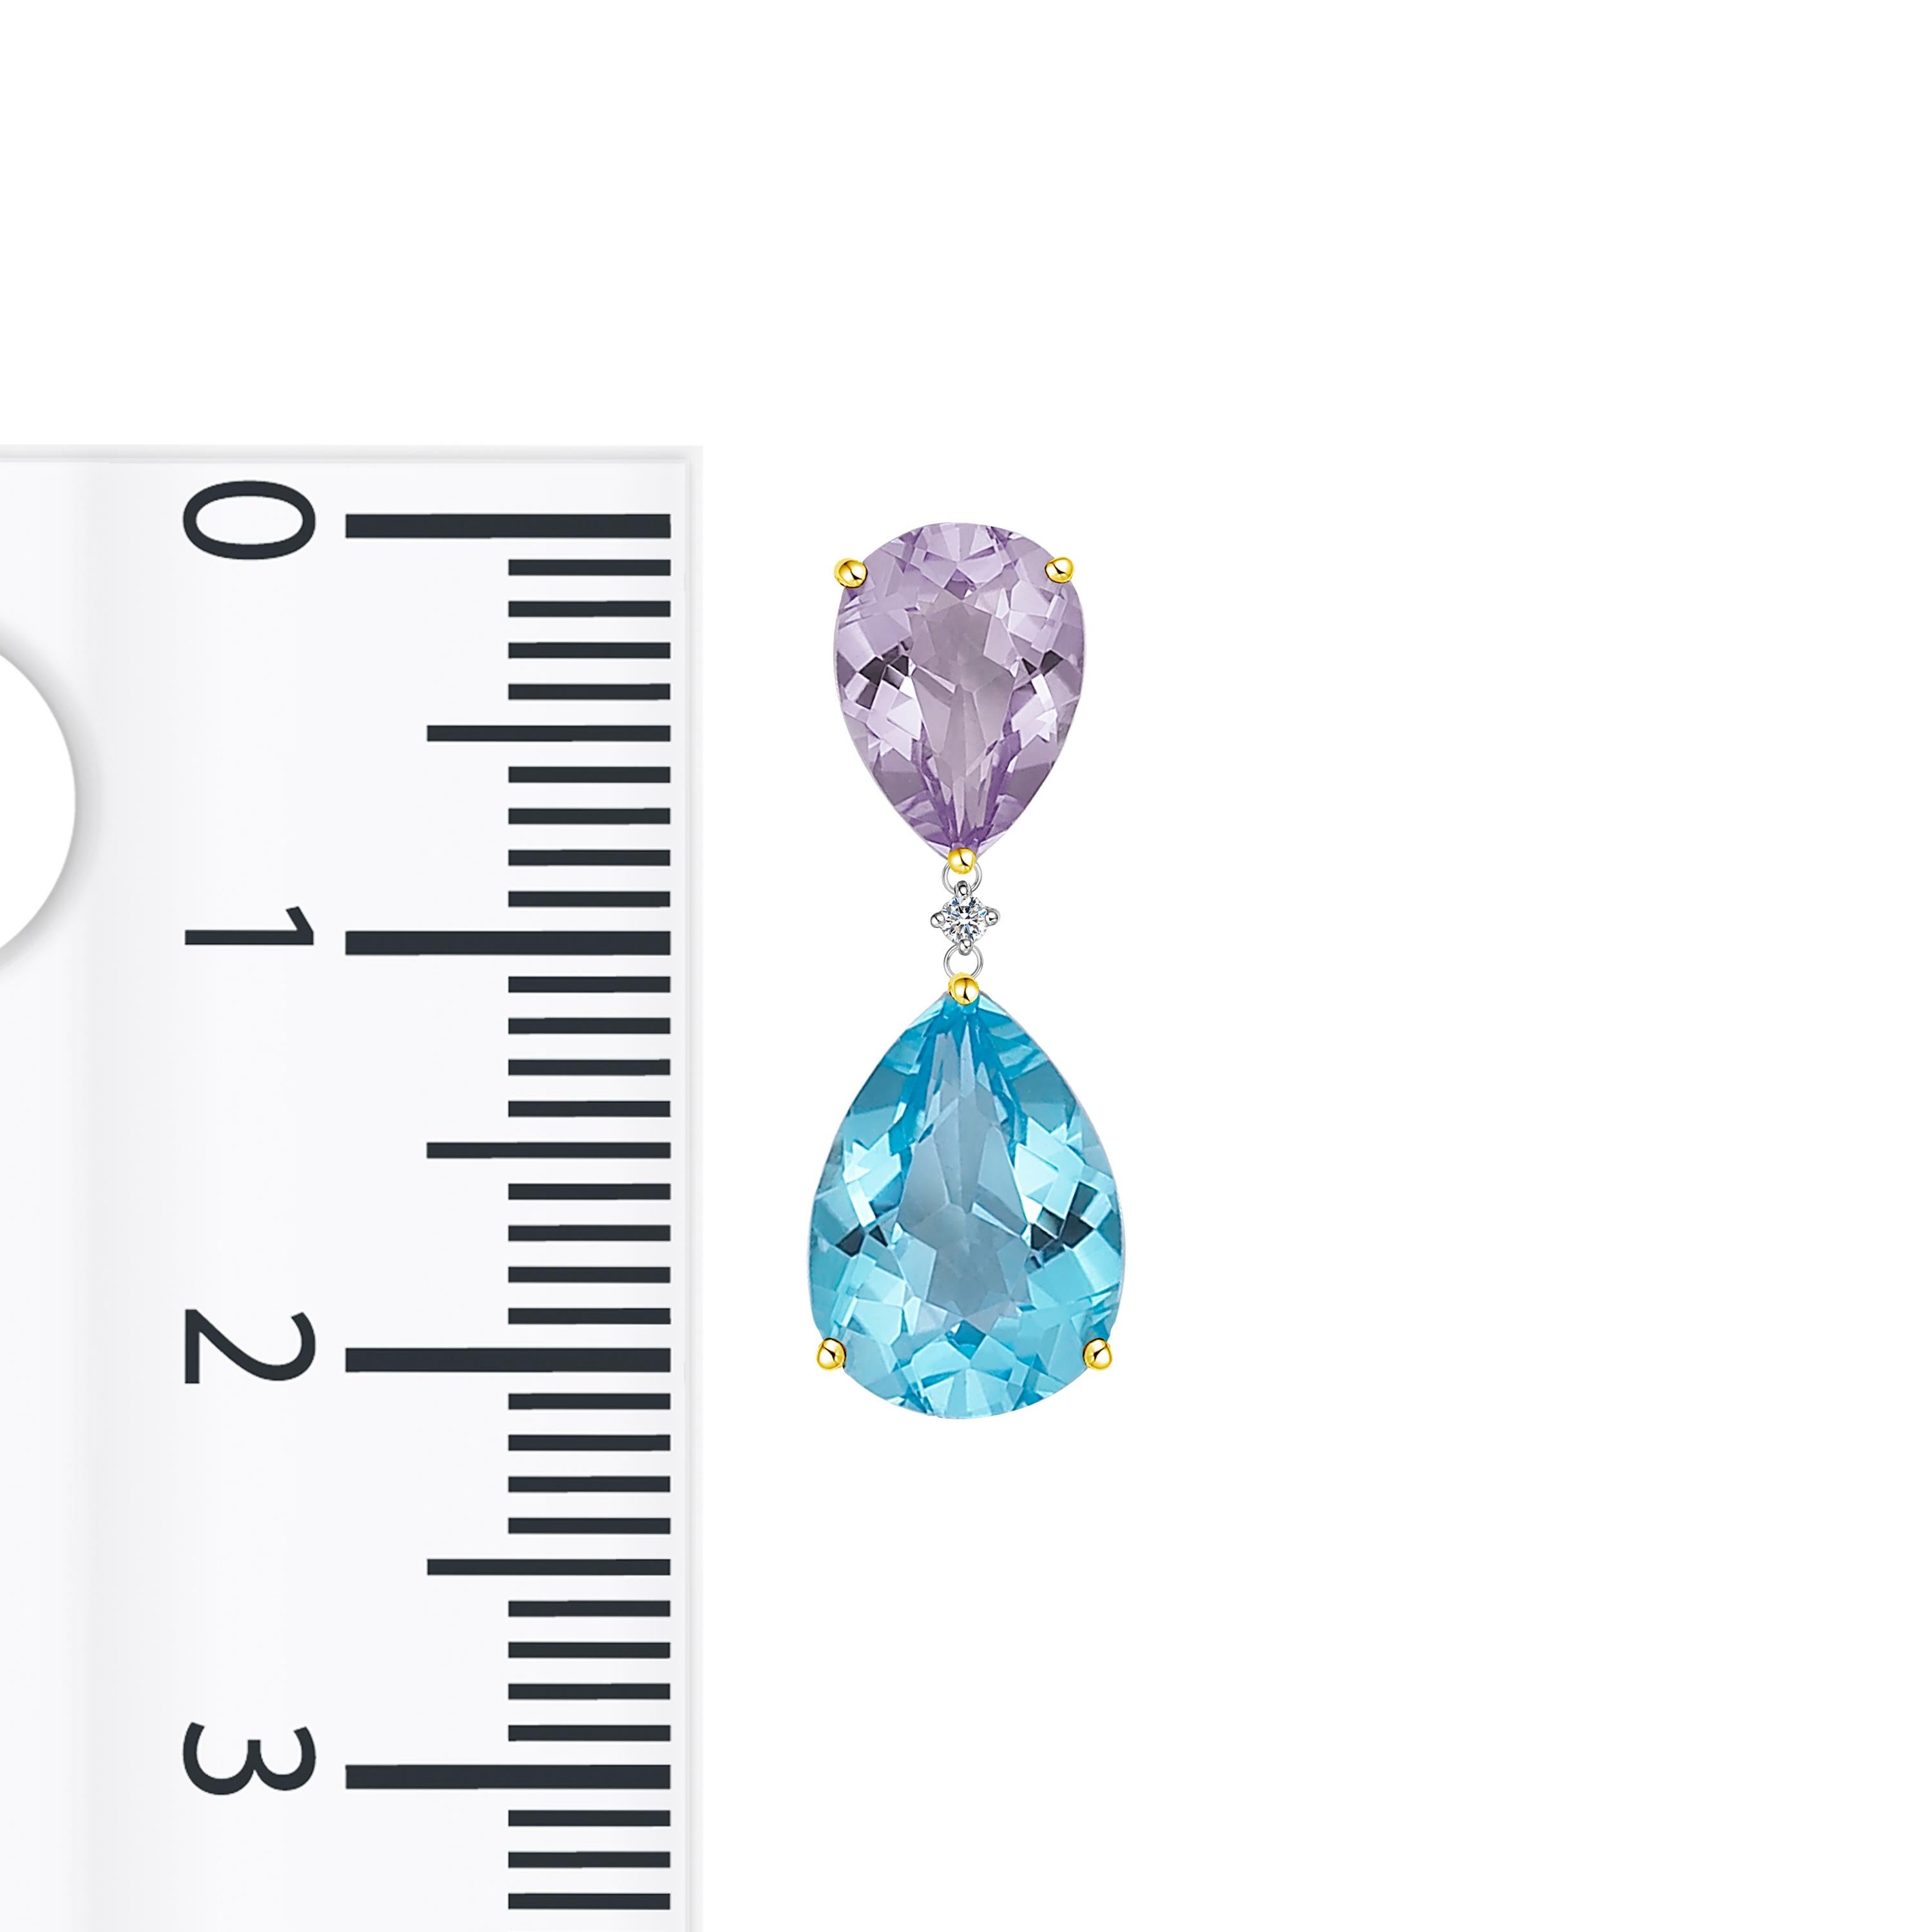 Description:
Add a touch of colour to your look with bright, breathtaking gemstones. These drop earrings feature 2.20ct purple amethysts, 0.038ct diamonds and 7.05ct blue topazes set in 18ct white gold with yellow gold-plated